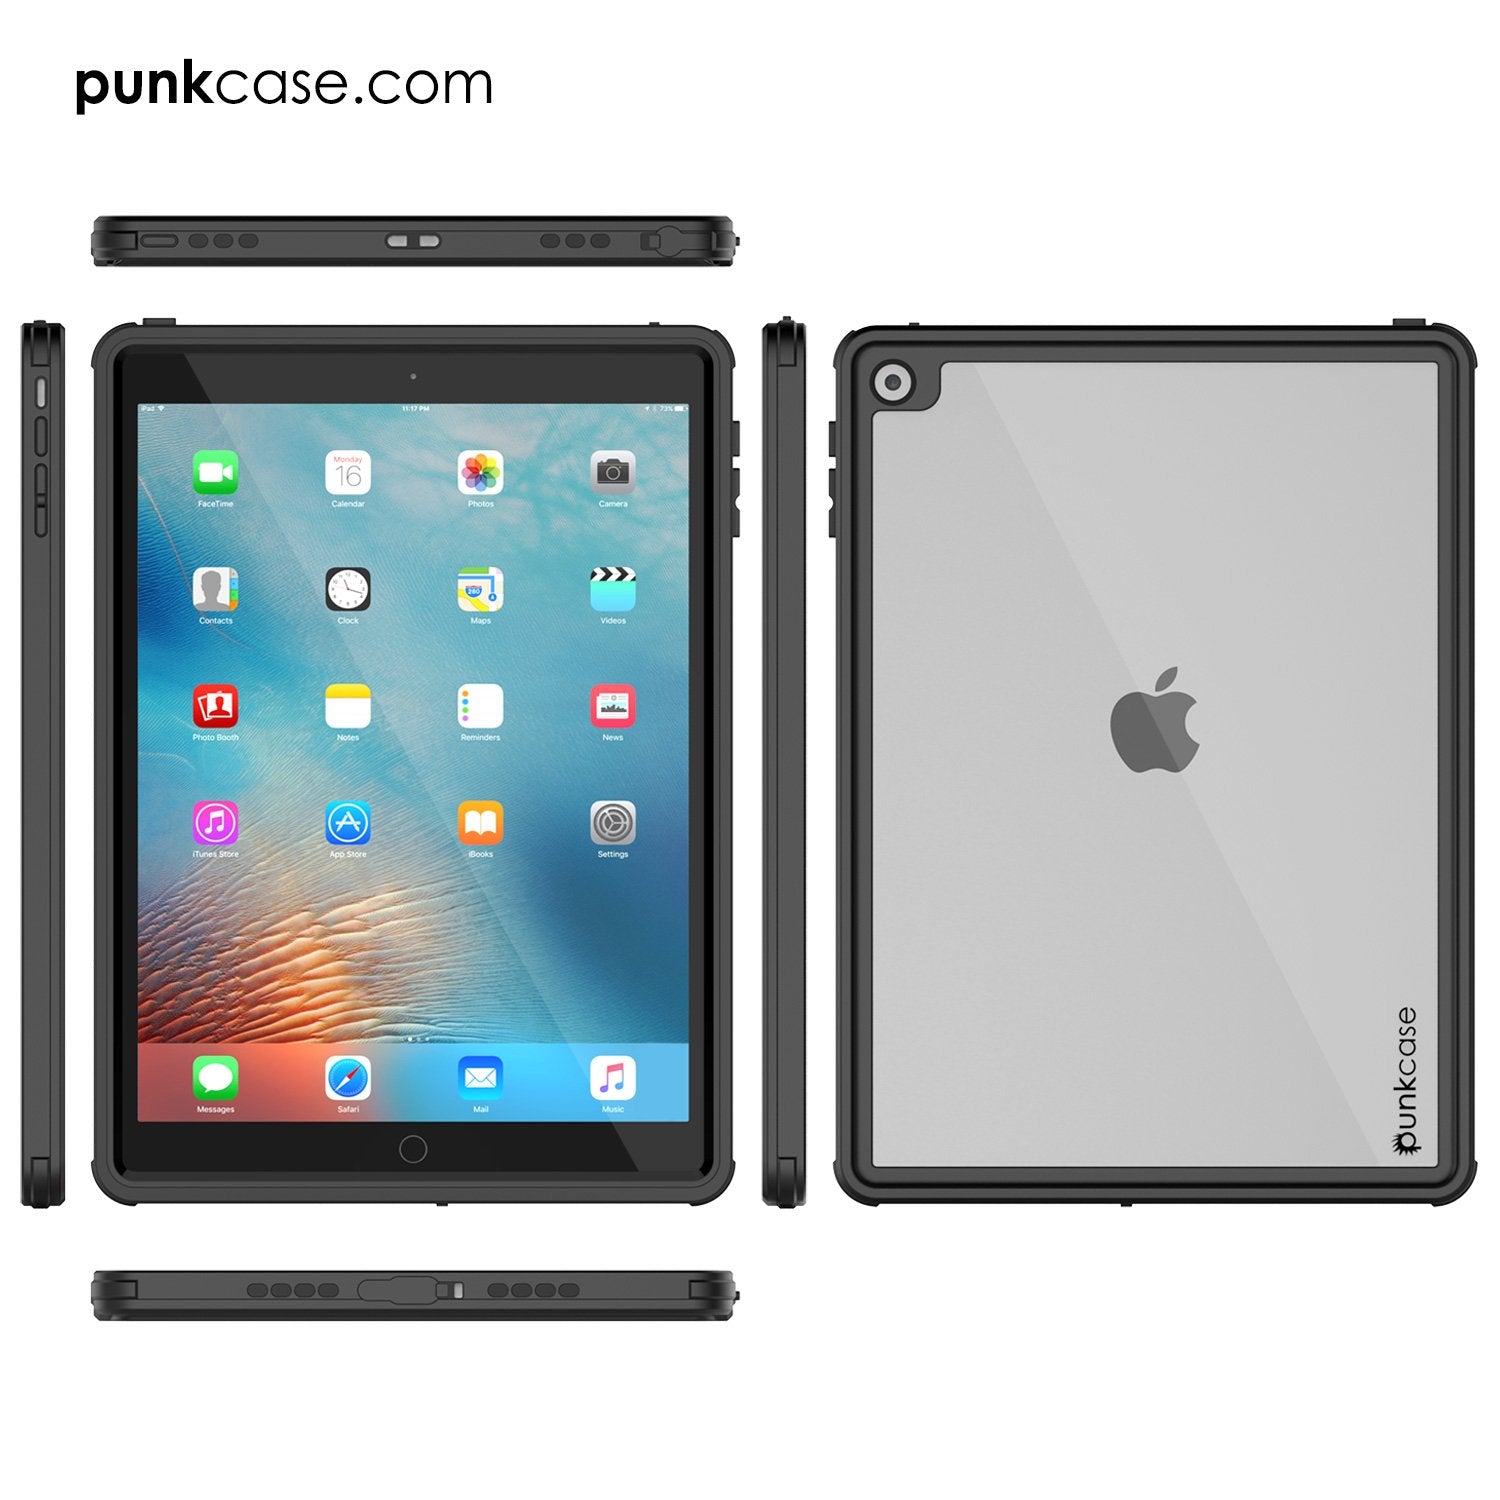 Punkcase iPad Pro 9.7 Case [CRYSTAL Series], Waterproof, Ultra-Thin Cover [Shockproof] [Dustproof] with Built-in Screen Protector [Black] - PunkCase NZ